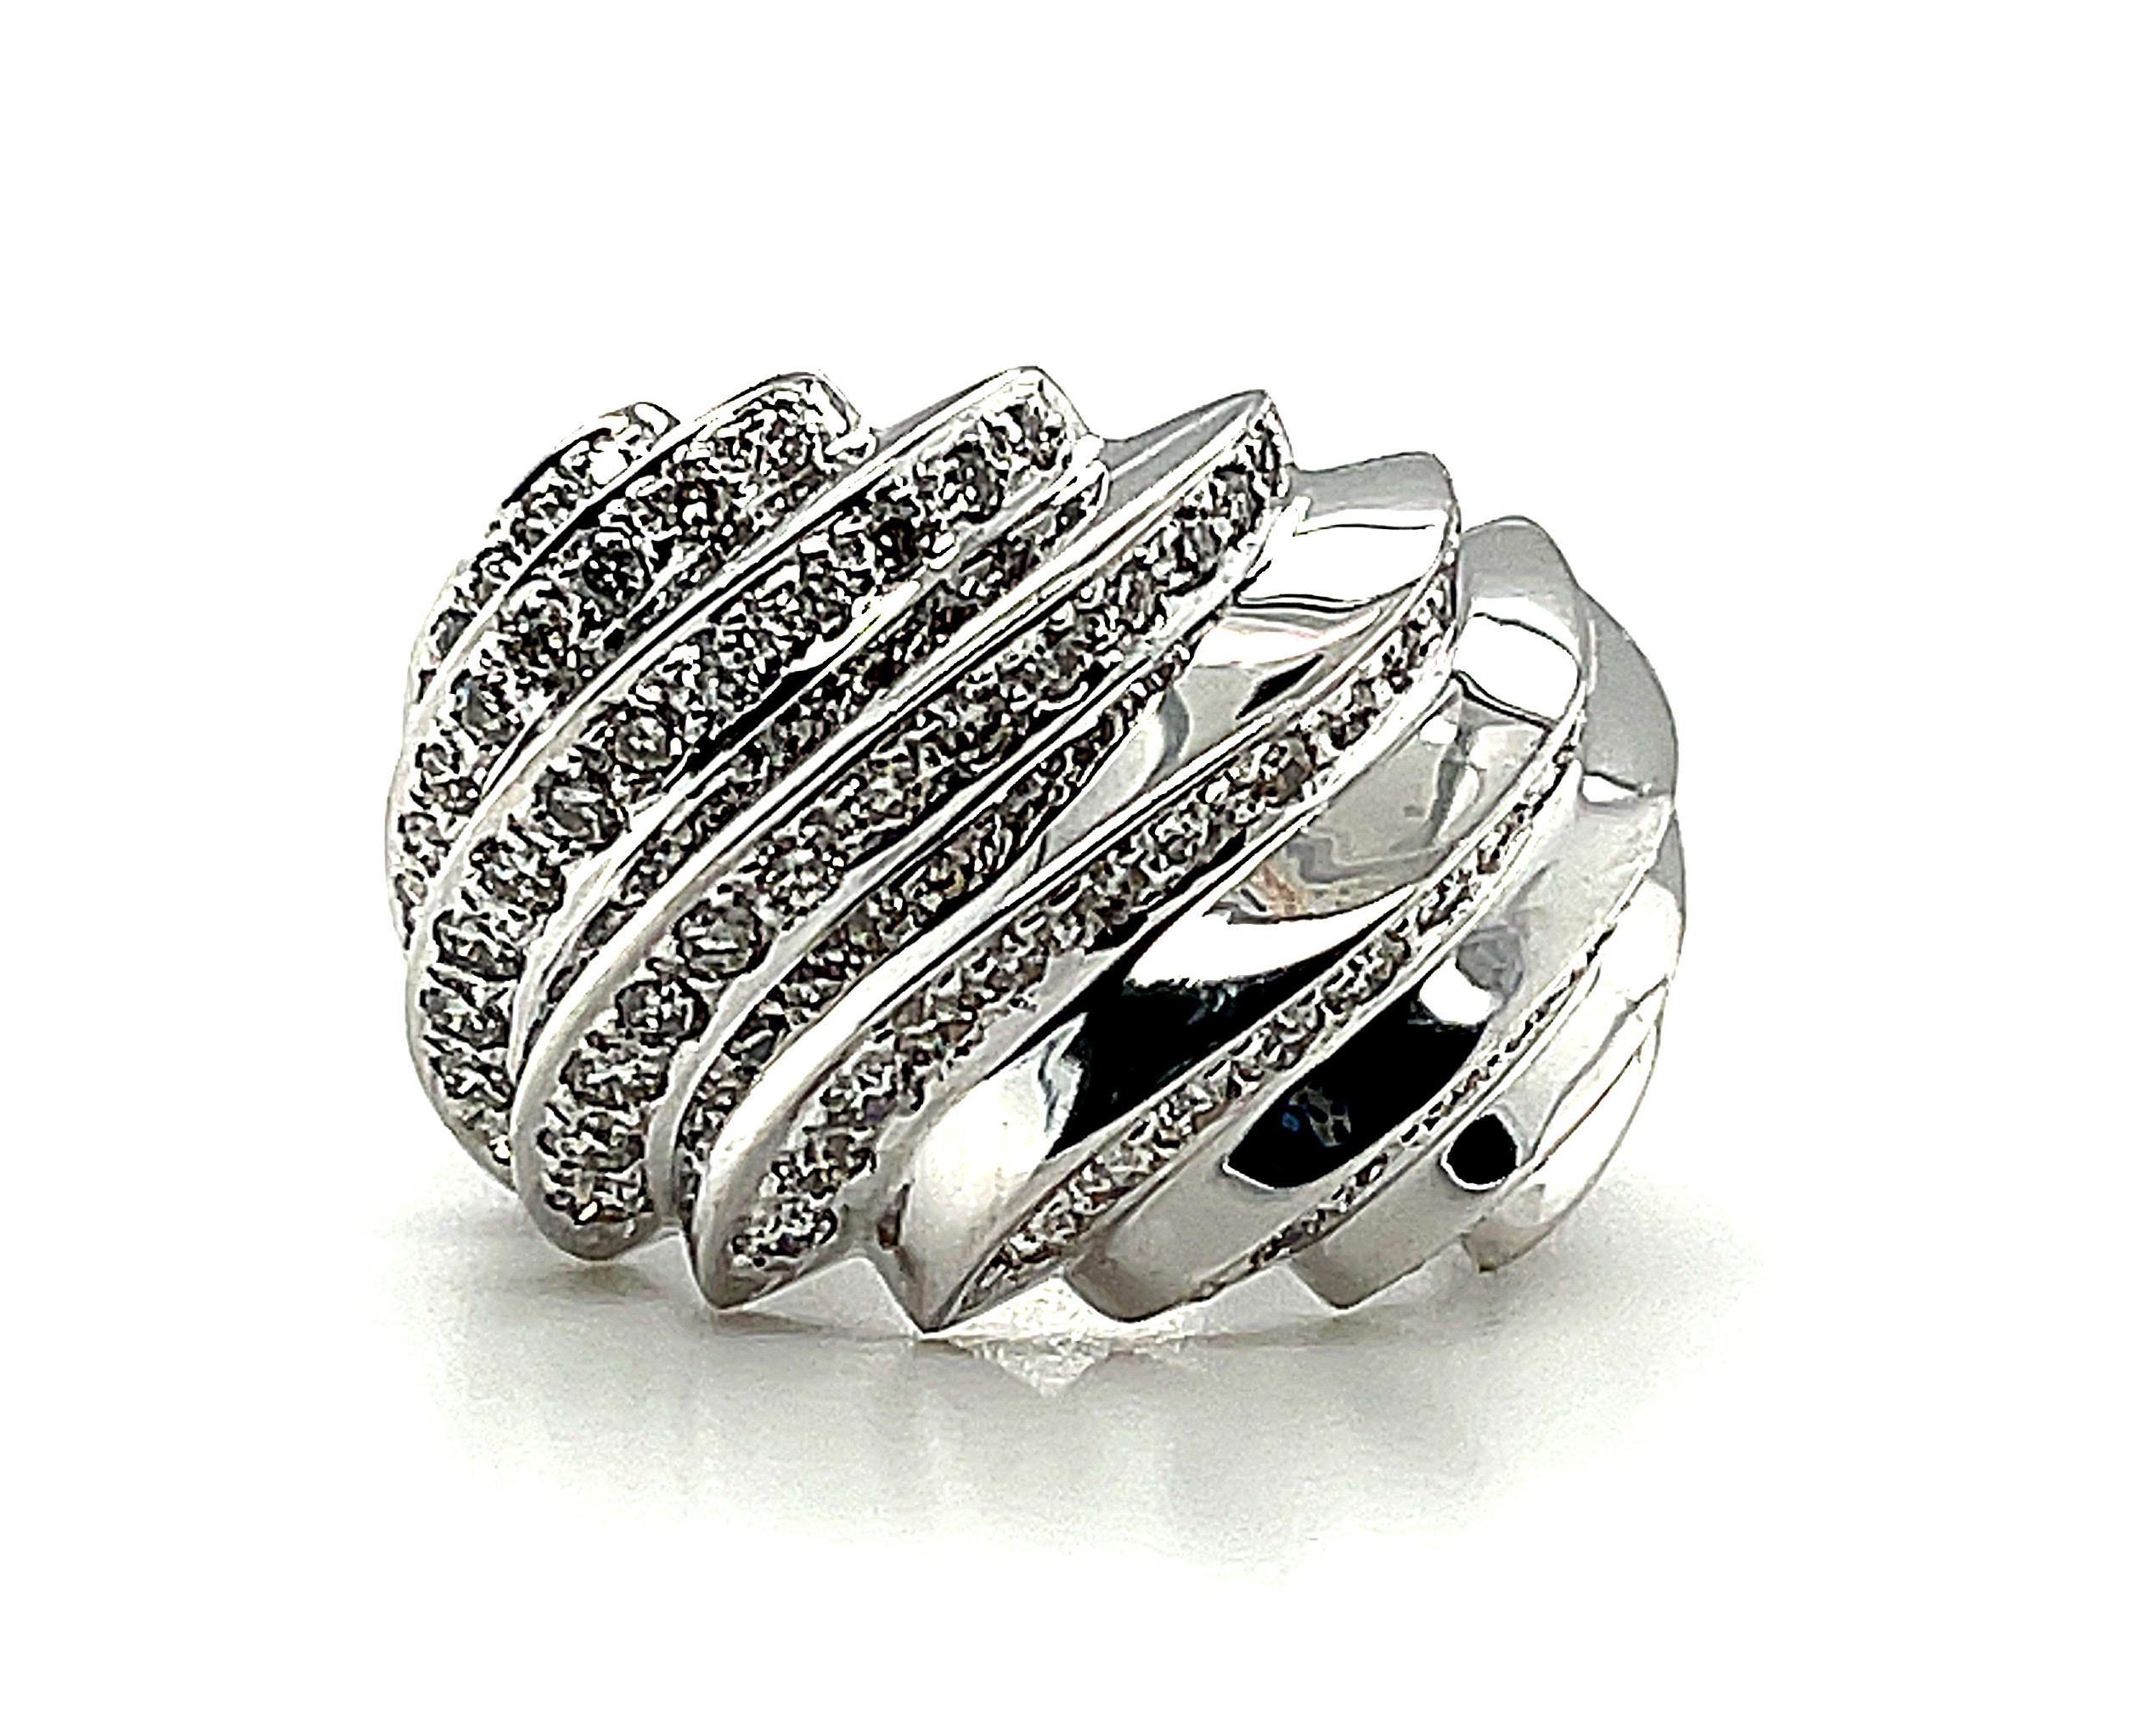 The cascading ridges of pave set diamonds on this gorgeous dome ring create a truly eye-catching visual effect! Set with 92 round brilliant cut diamonds, this bold 18k white gold this ring is stunning and fun to wear. It has a distinctive Art Deco /